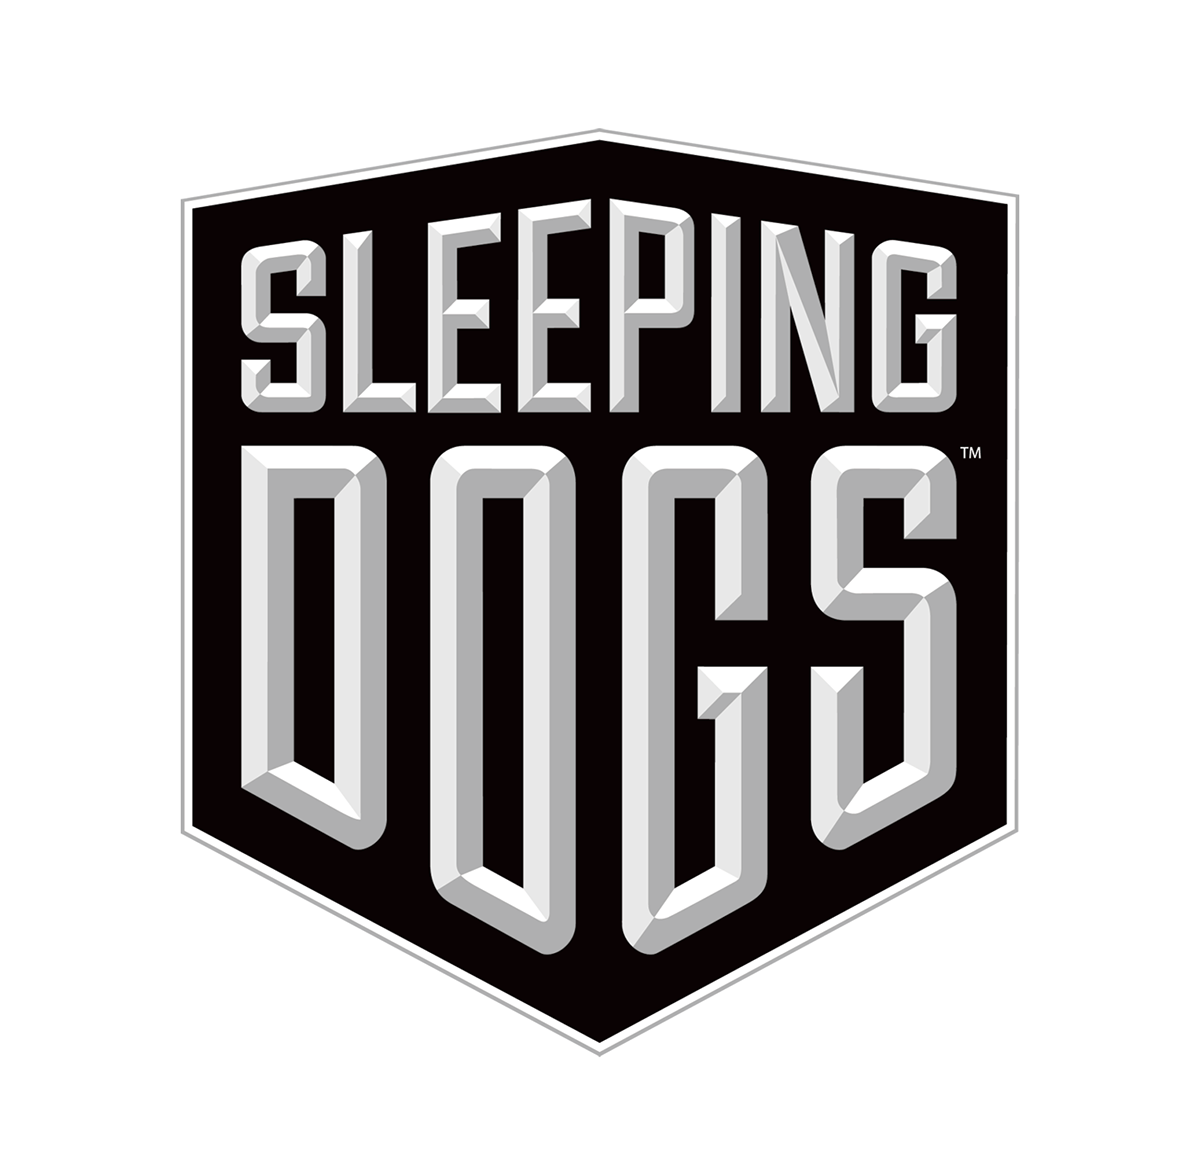 video game  poster Tyler Stout sleeping dogs